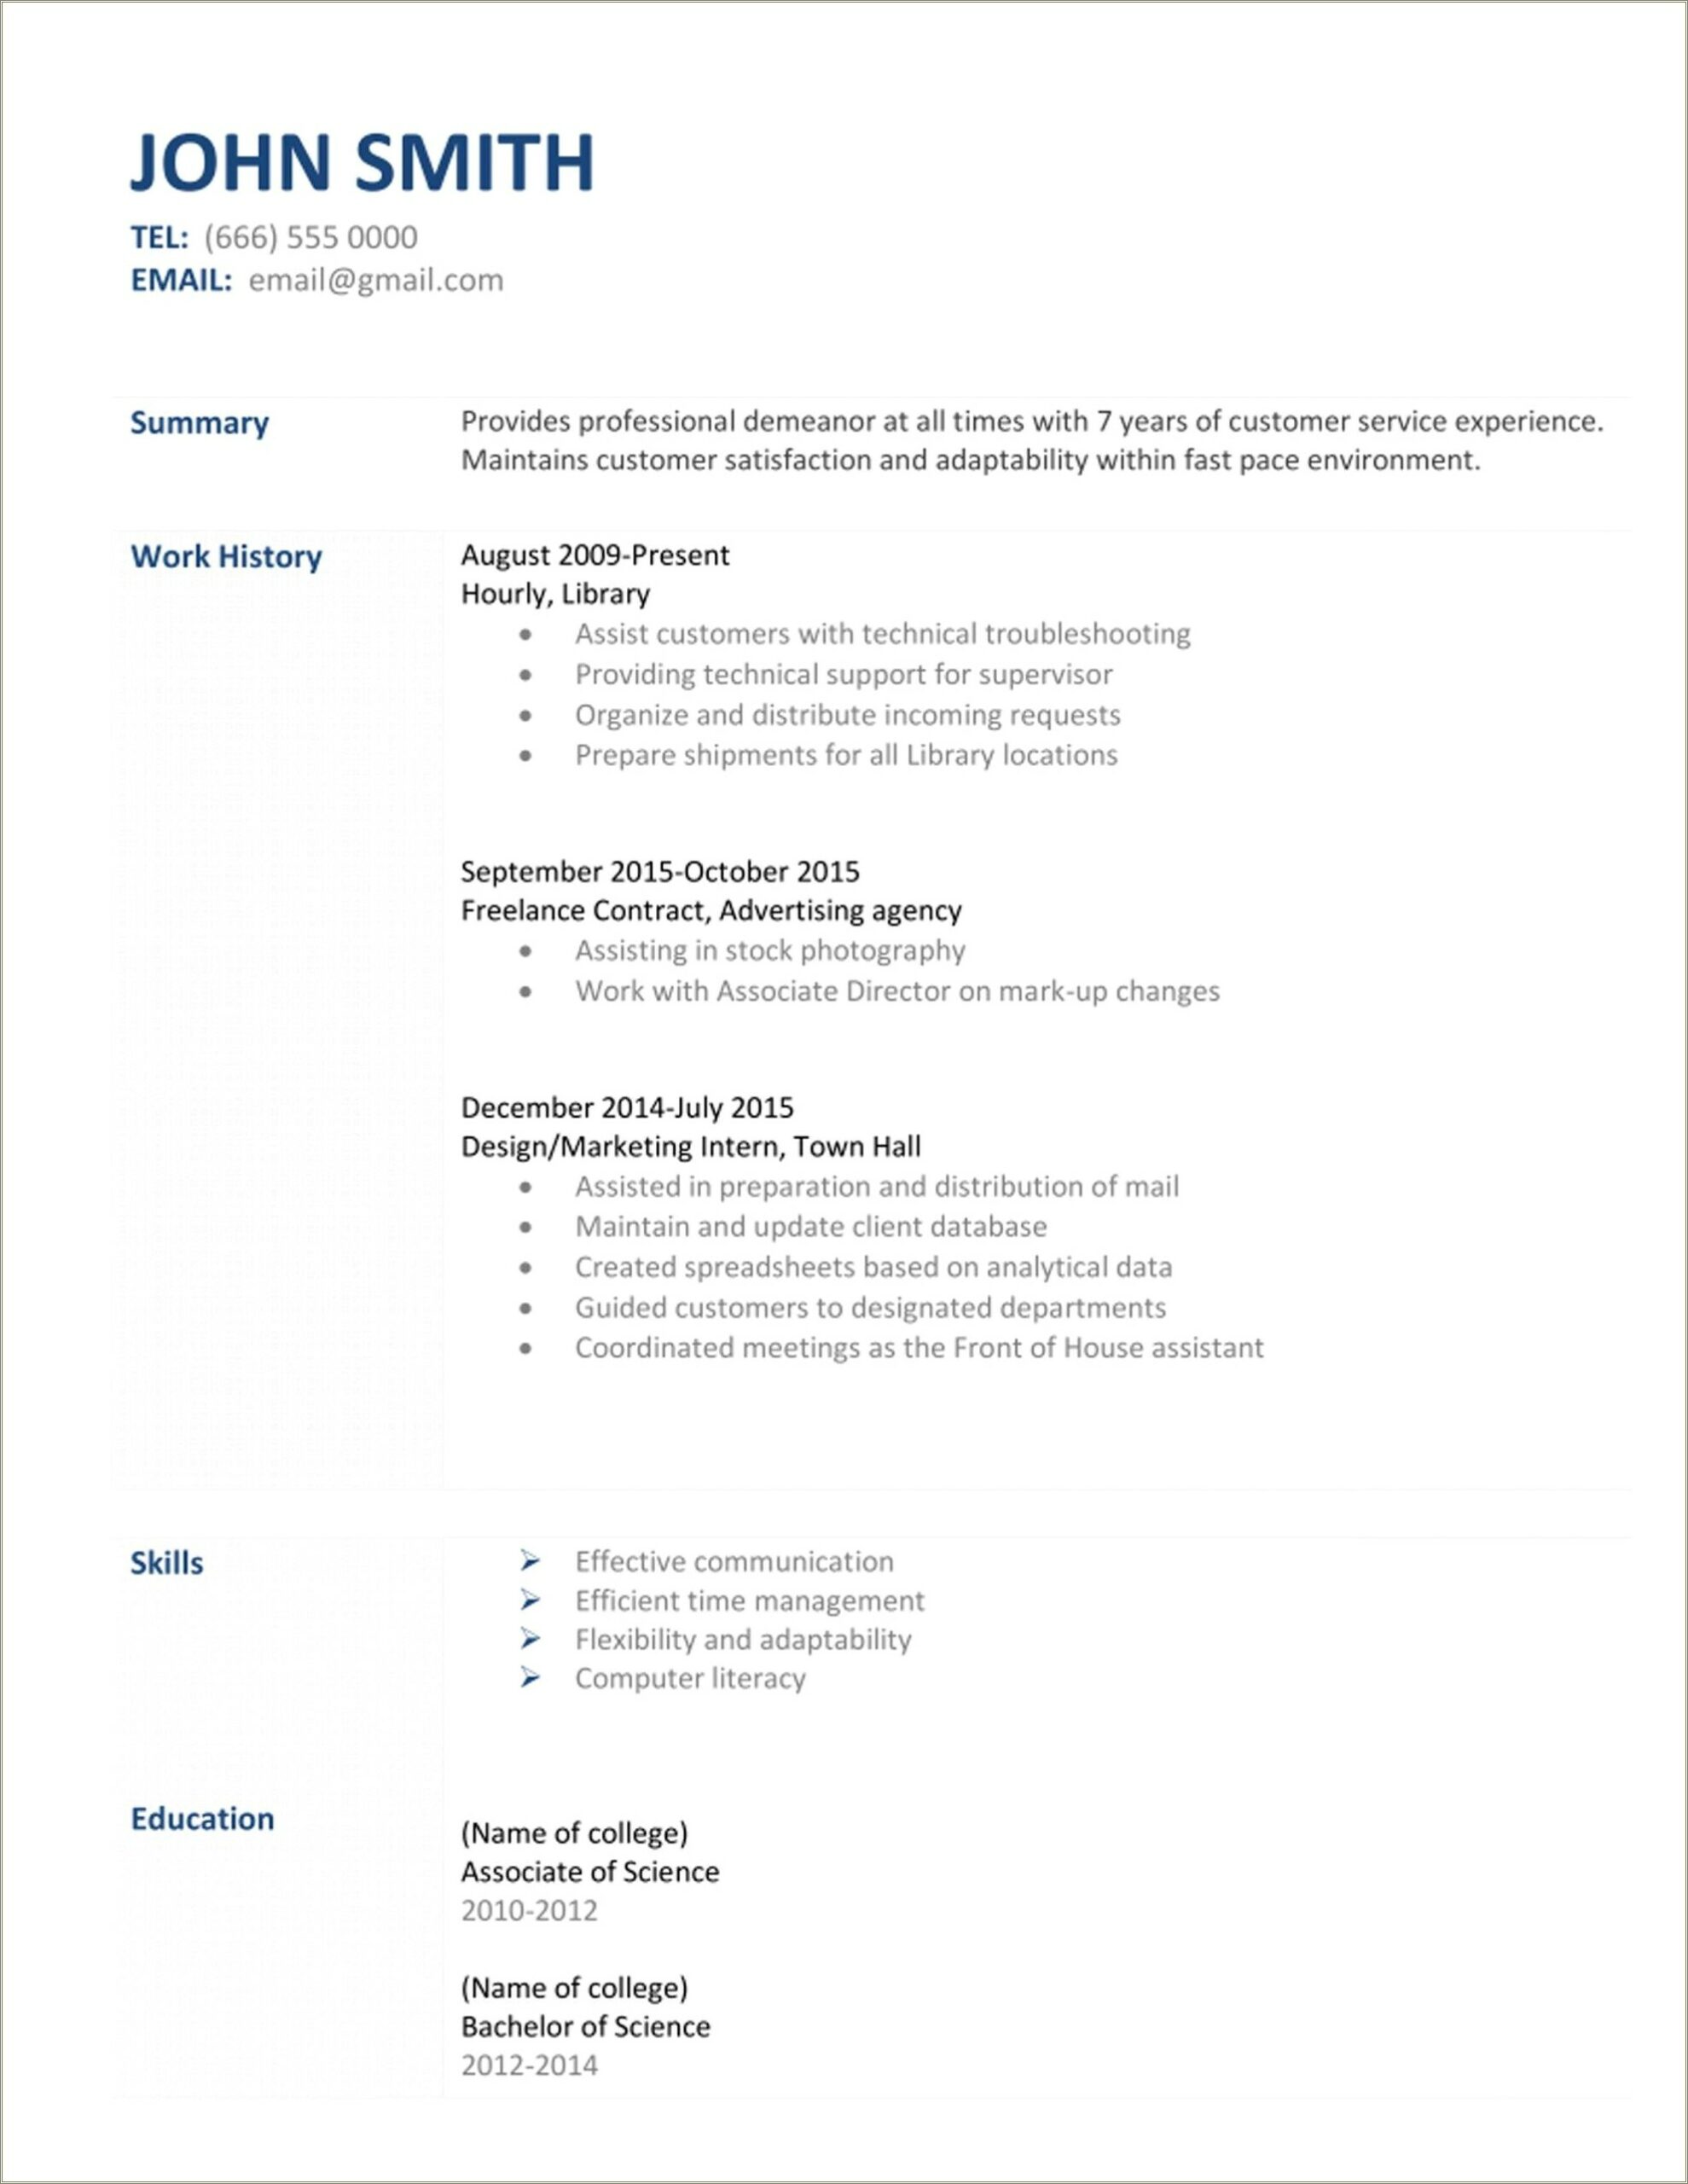 Resume Example Adapt To Changing Requirements